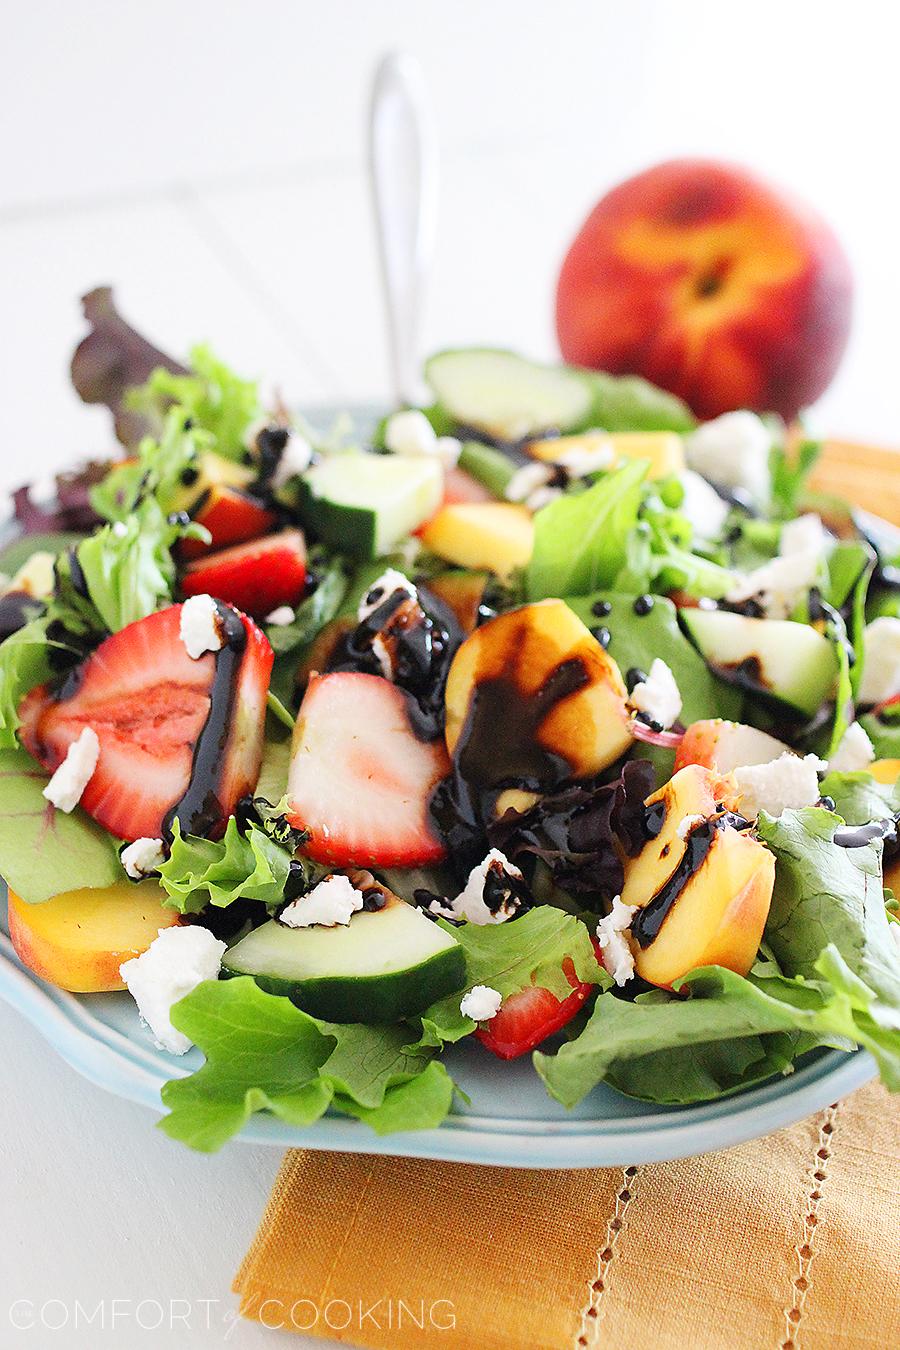 Summer Strawberry-Peach Salad with Goat Cheese – Sink a fork into this crisp salad with fresh peaches, strawberries, cucumbers and goat cheese! | thecomfortofcooking.com